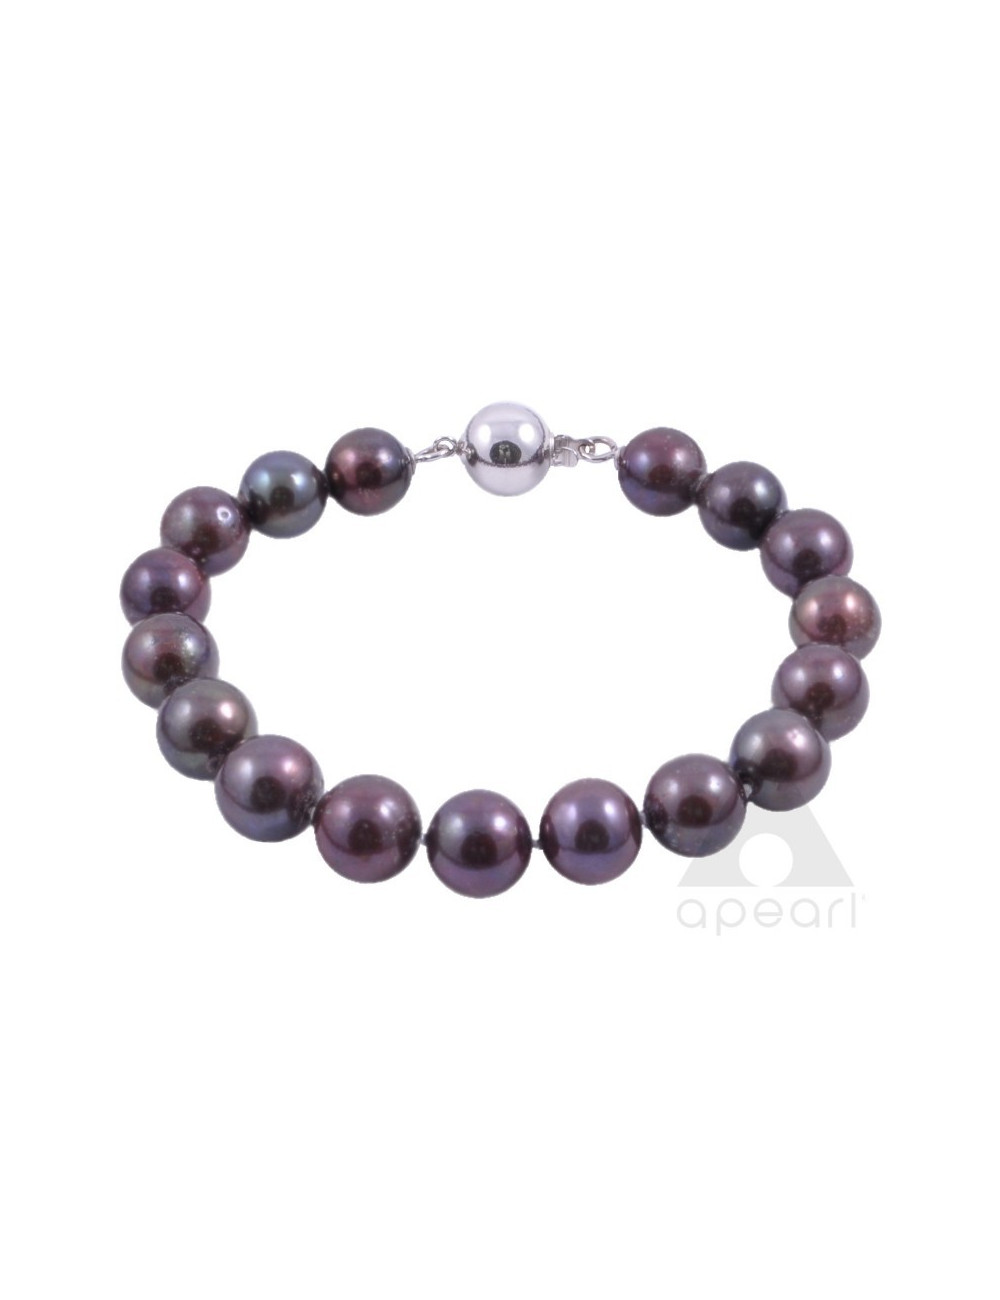 Dark large pearl bracelet with white gold ball clasp BO1011WG3C